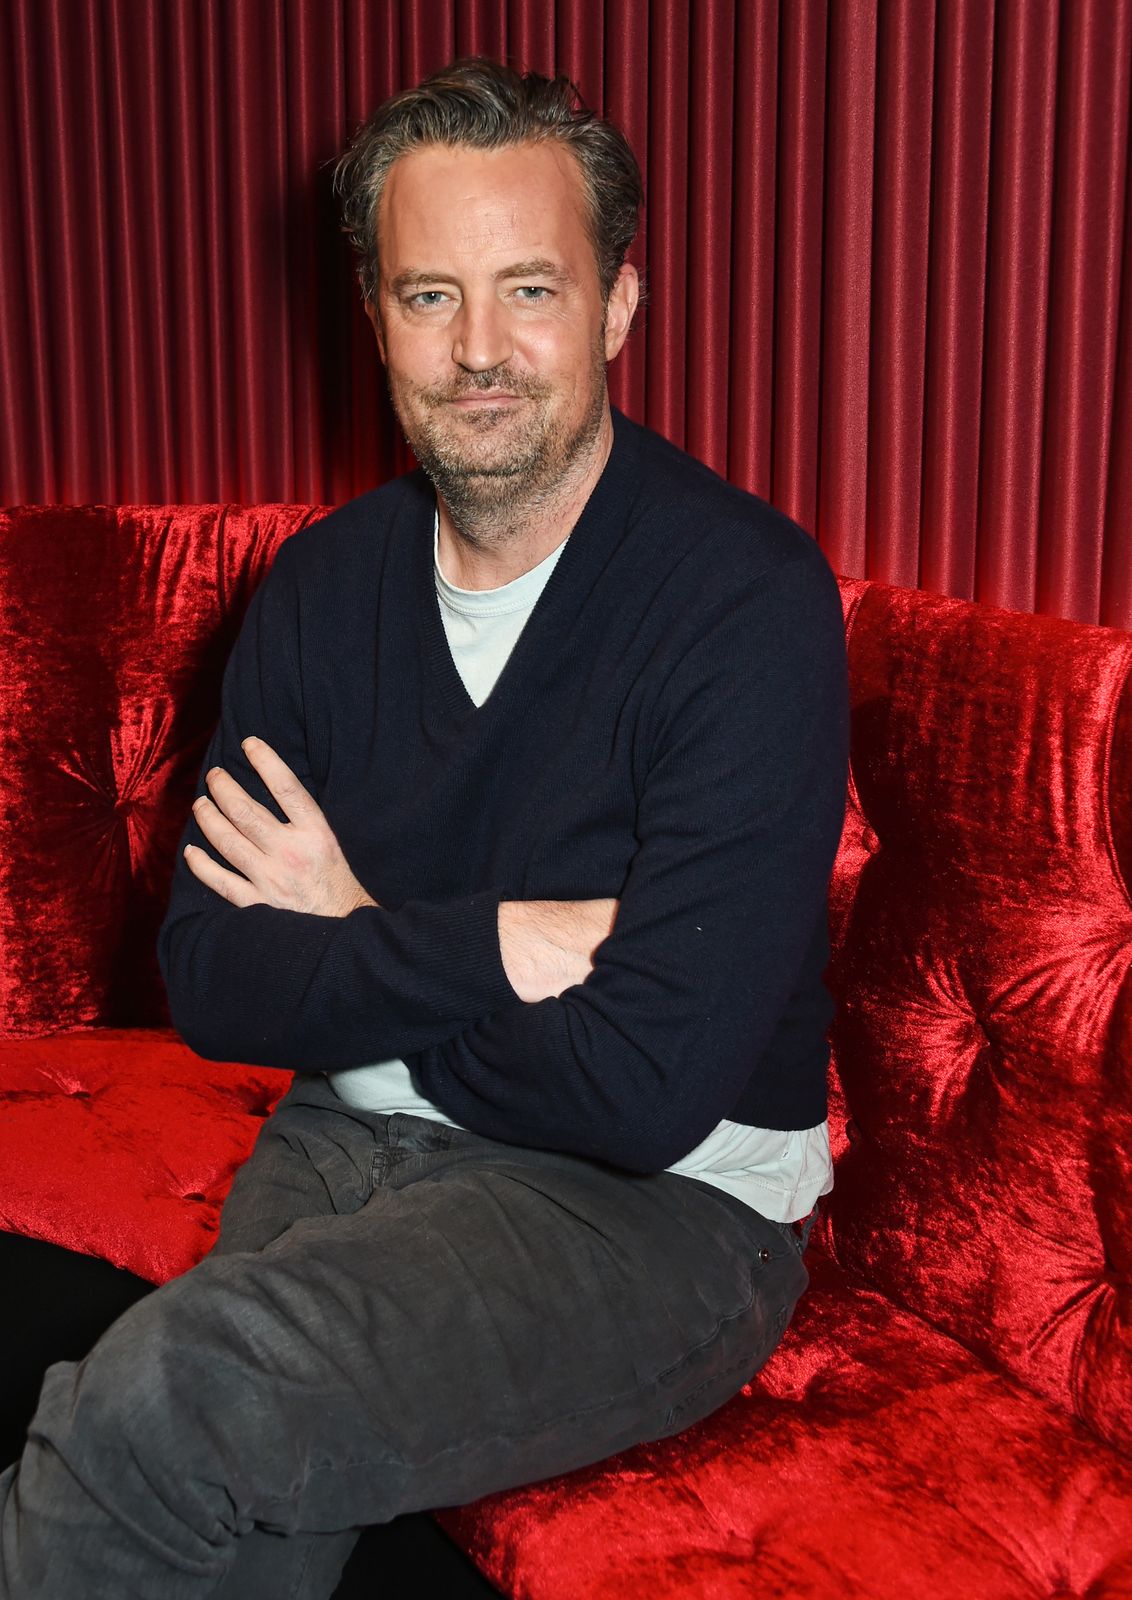 Matthew Perry poses at a photocall for the play "The End Of Longing" on February 8, 2016, in London, England | Photo: David M. Benett/Dave Benett/Getty Images